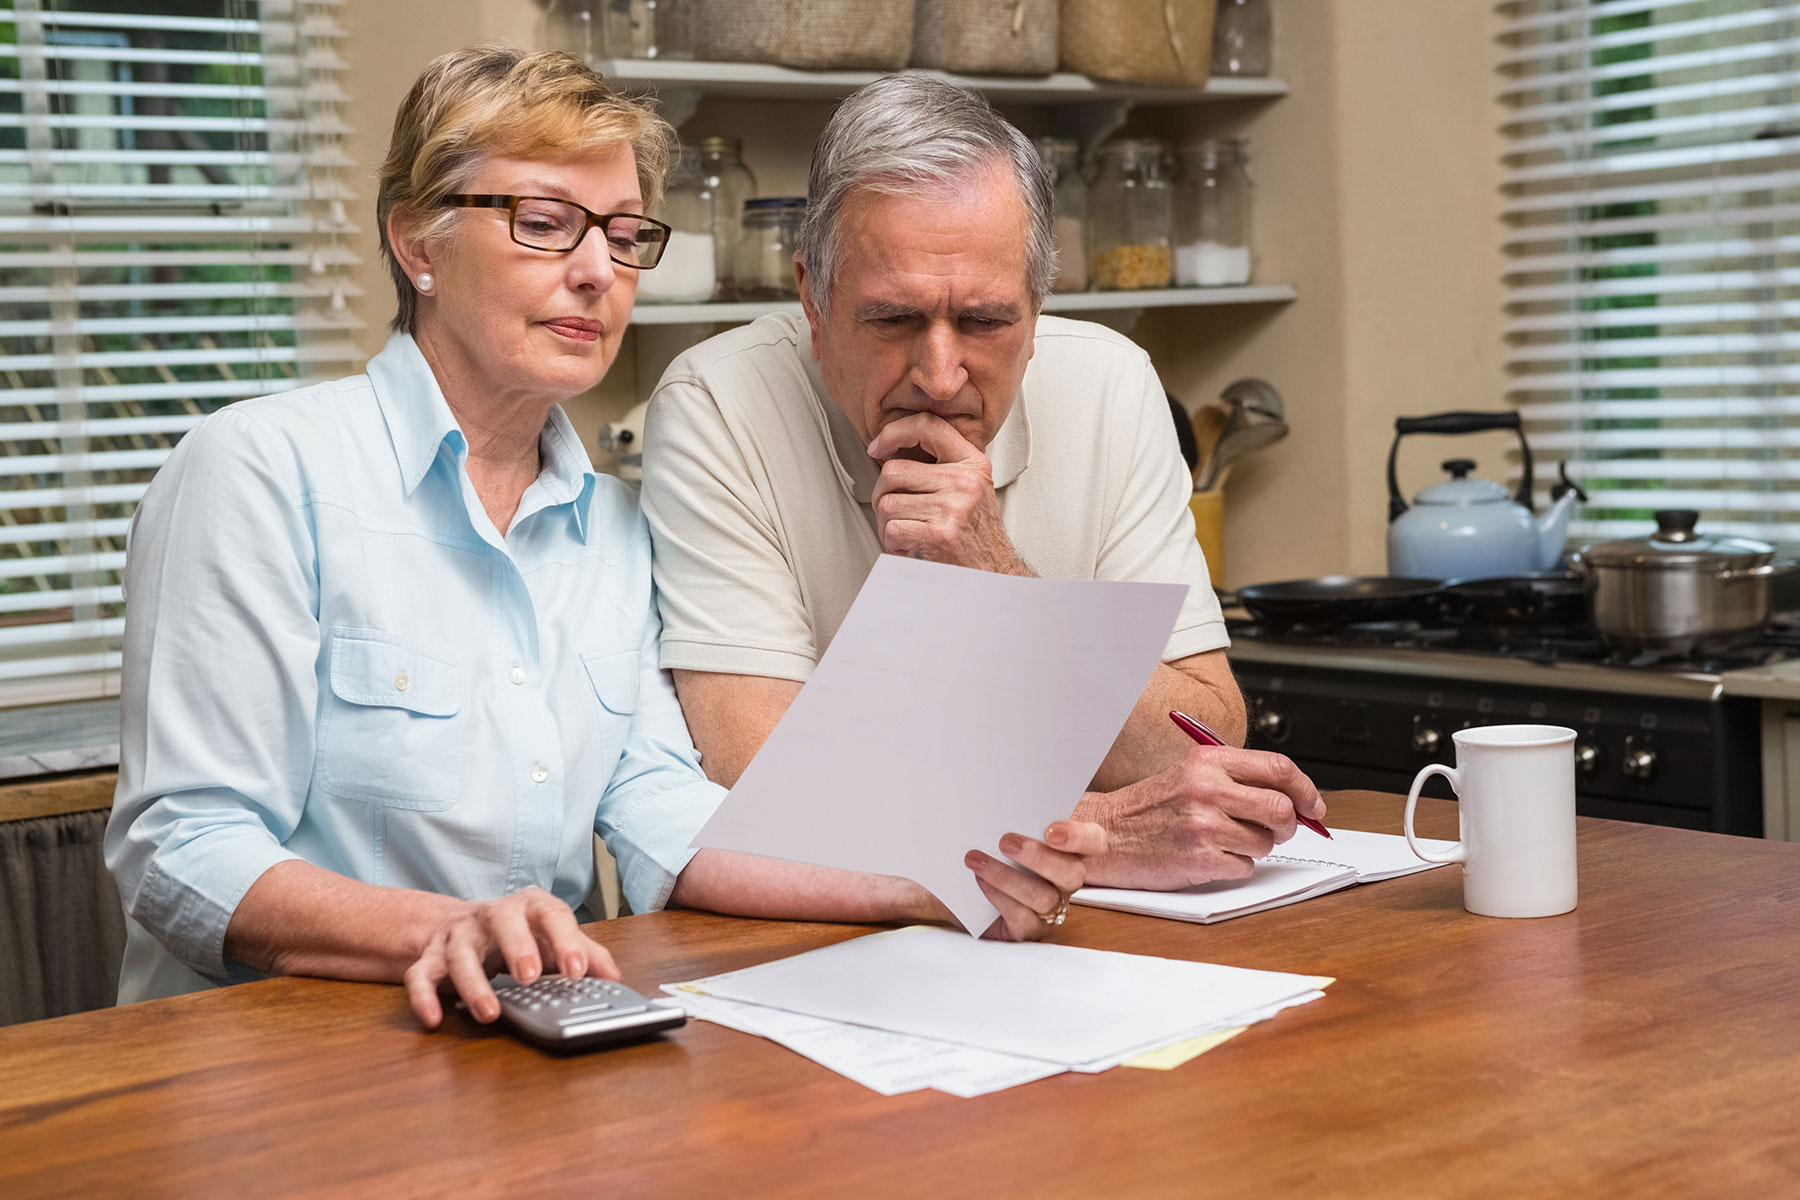 Older man and woman studying paperwork at a breakfast nook in their kitchen